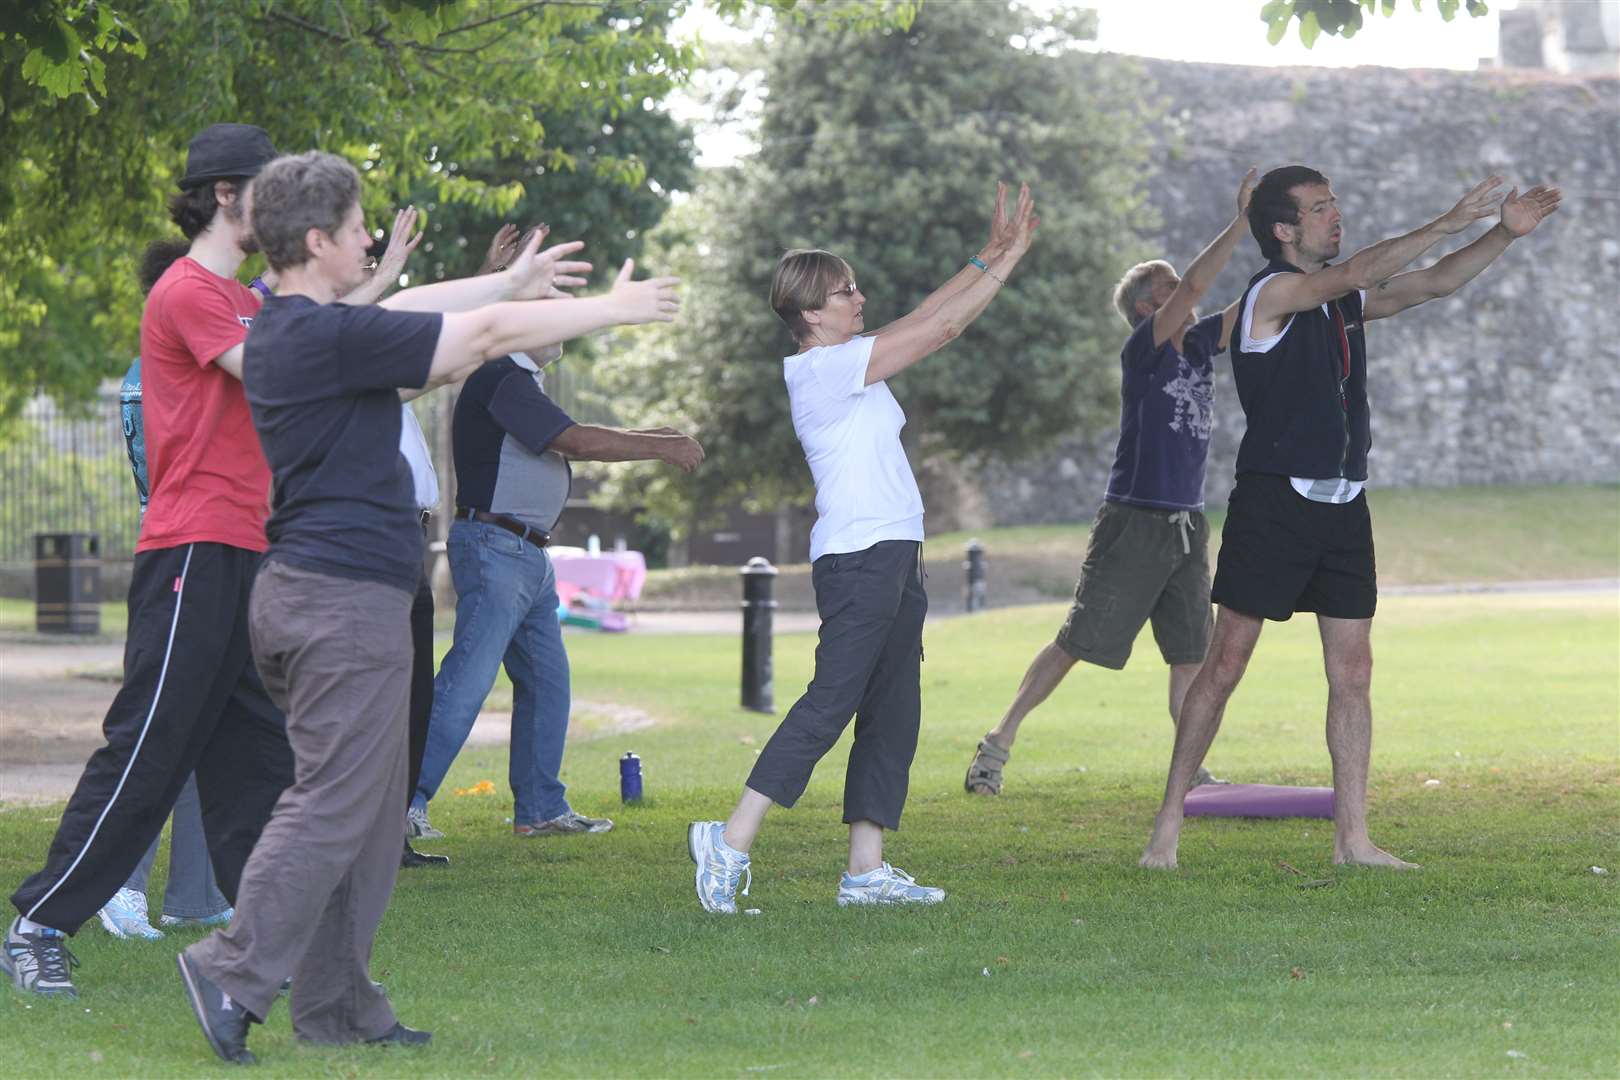 Combining fresh air and exercise at a tai chi session